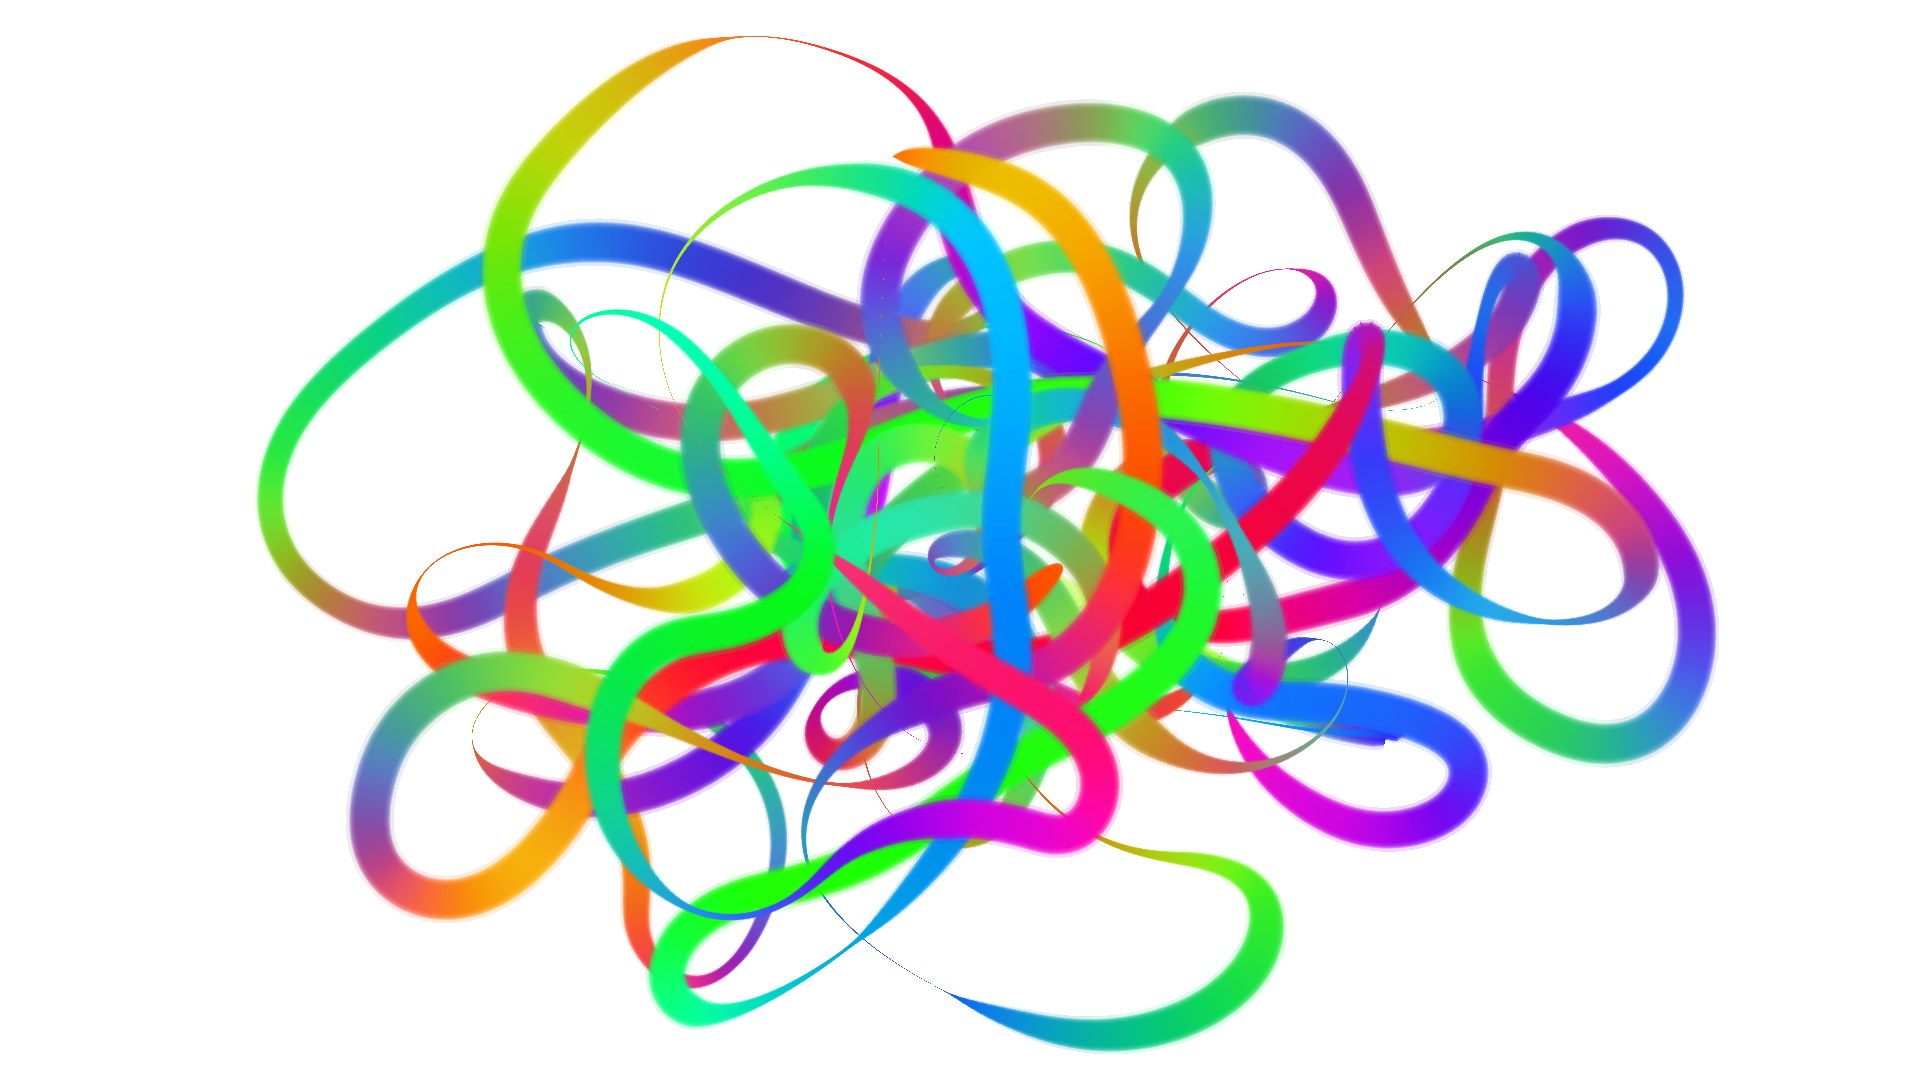 Screenshot of the work. A series of vivid looping lines of varying weights and hues, against a white background.